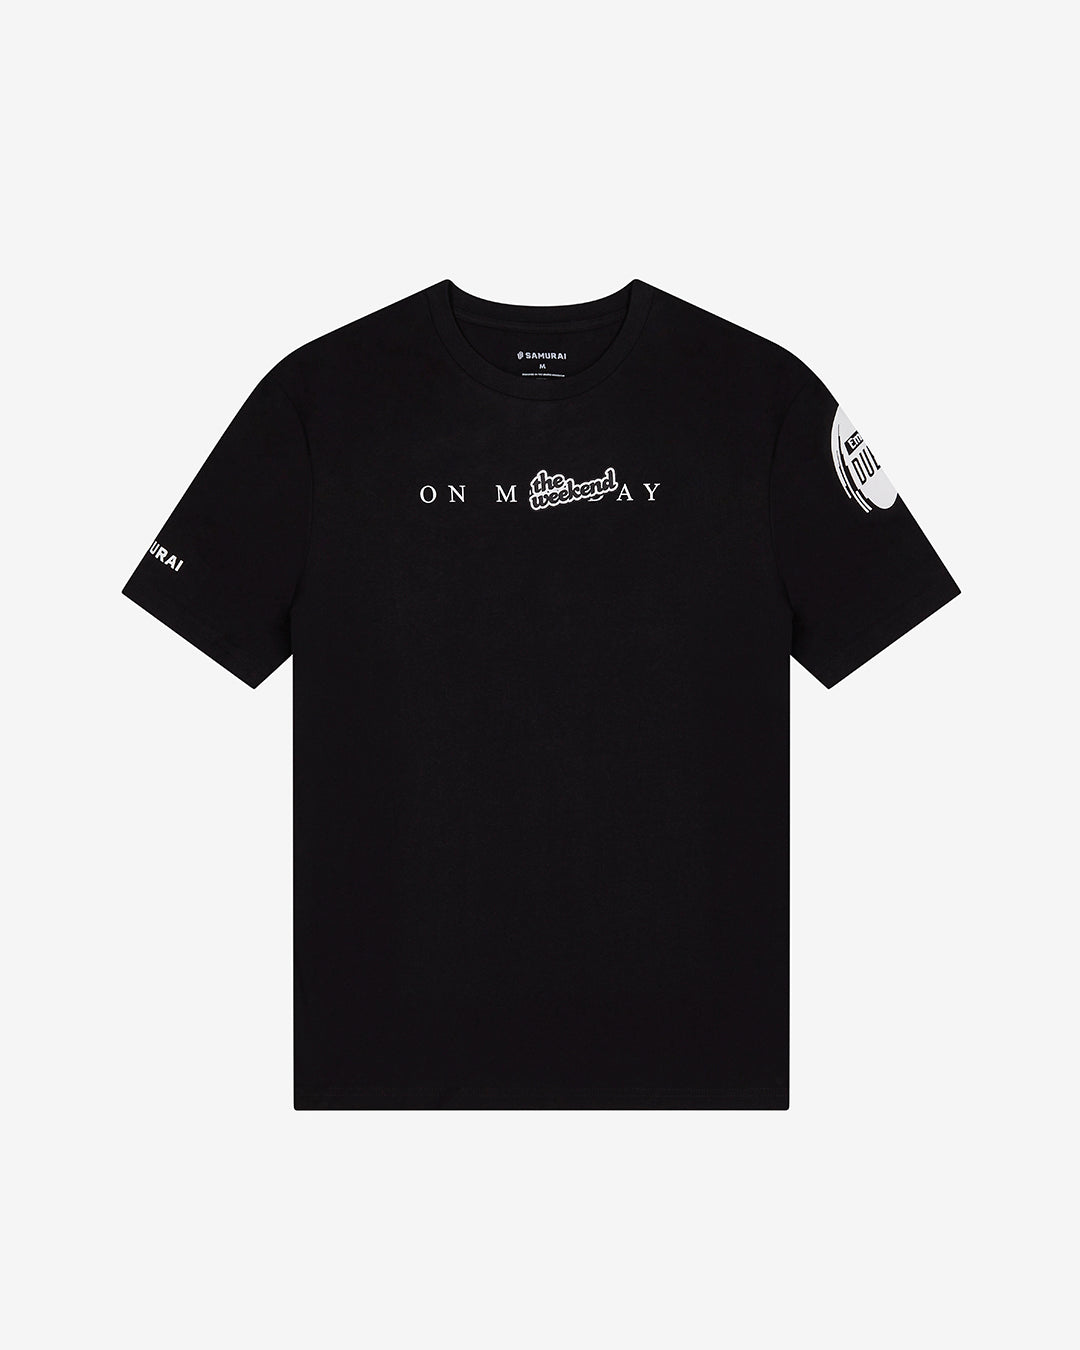 ED7:00 - On The Weekend T-Shirt - Black